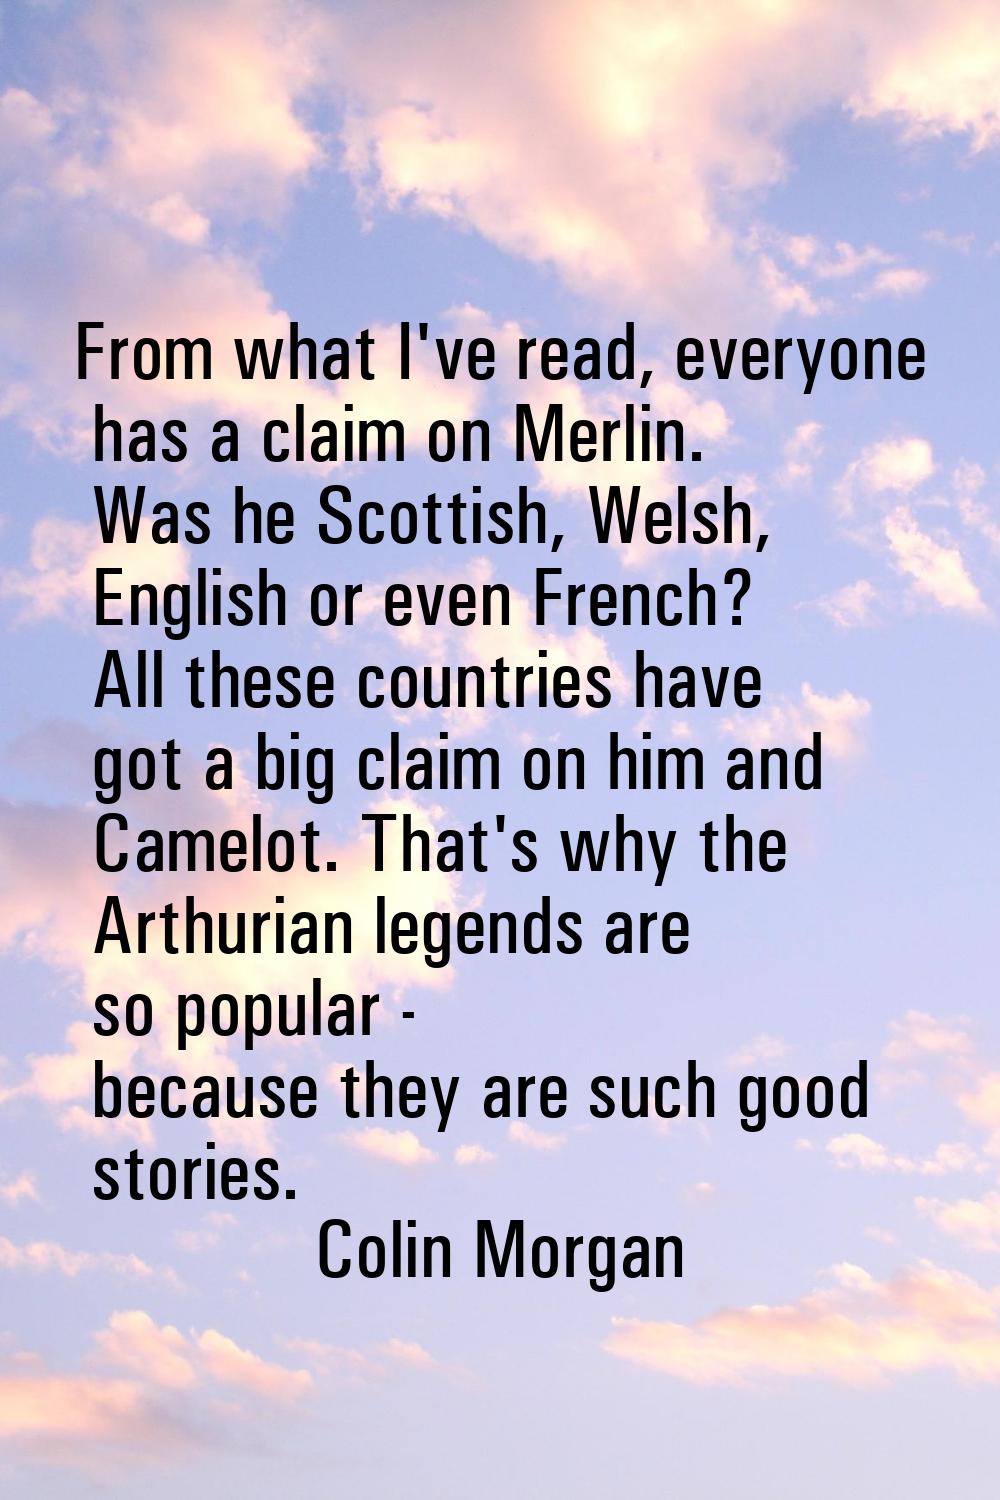 From what I've read, everyone has a claim on Merlin. Was he Scottish, Welsh, English or even French